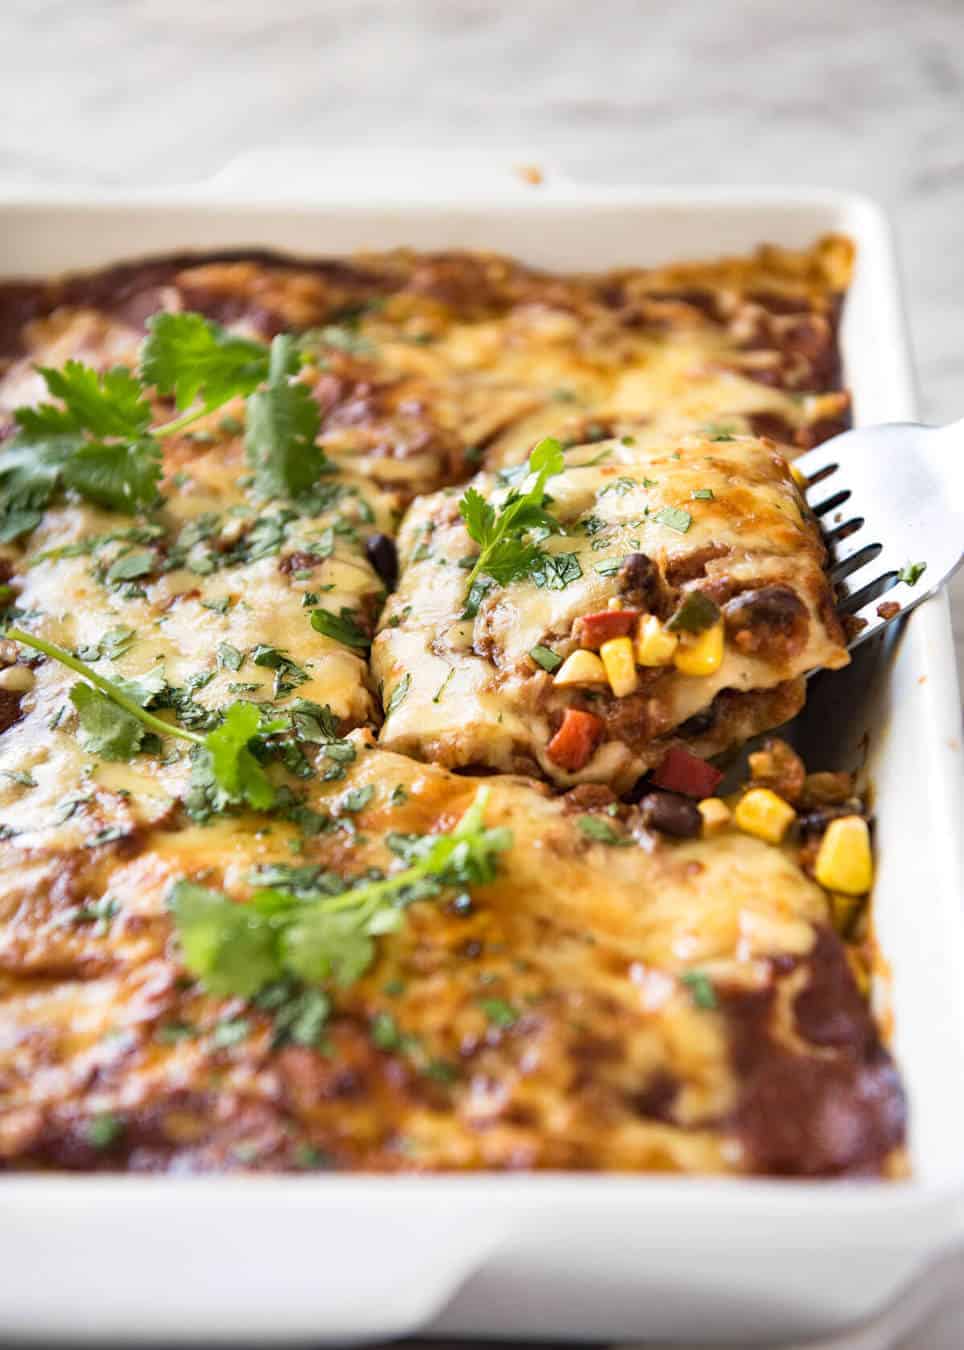 Vegetarian Mexican Caserole (Lasagna) - Fresh, healthy and loaded with Mexican flavours, just 342 calories per serving! www.recipetineats.com